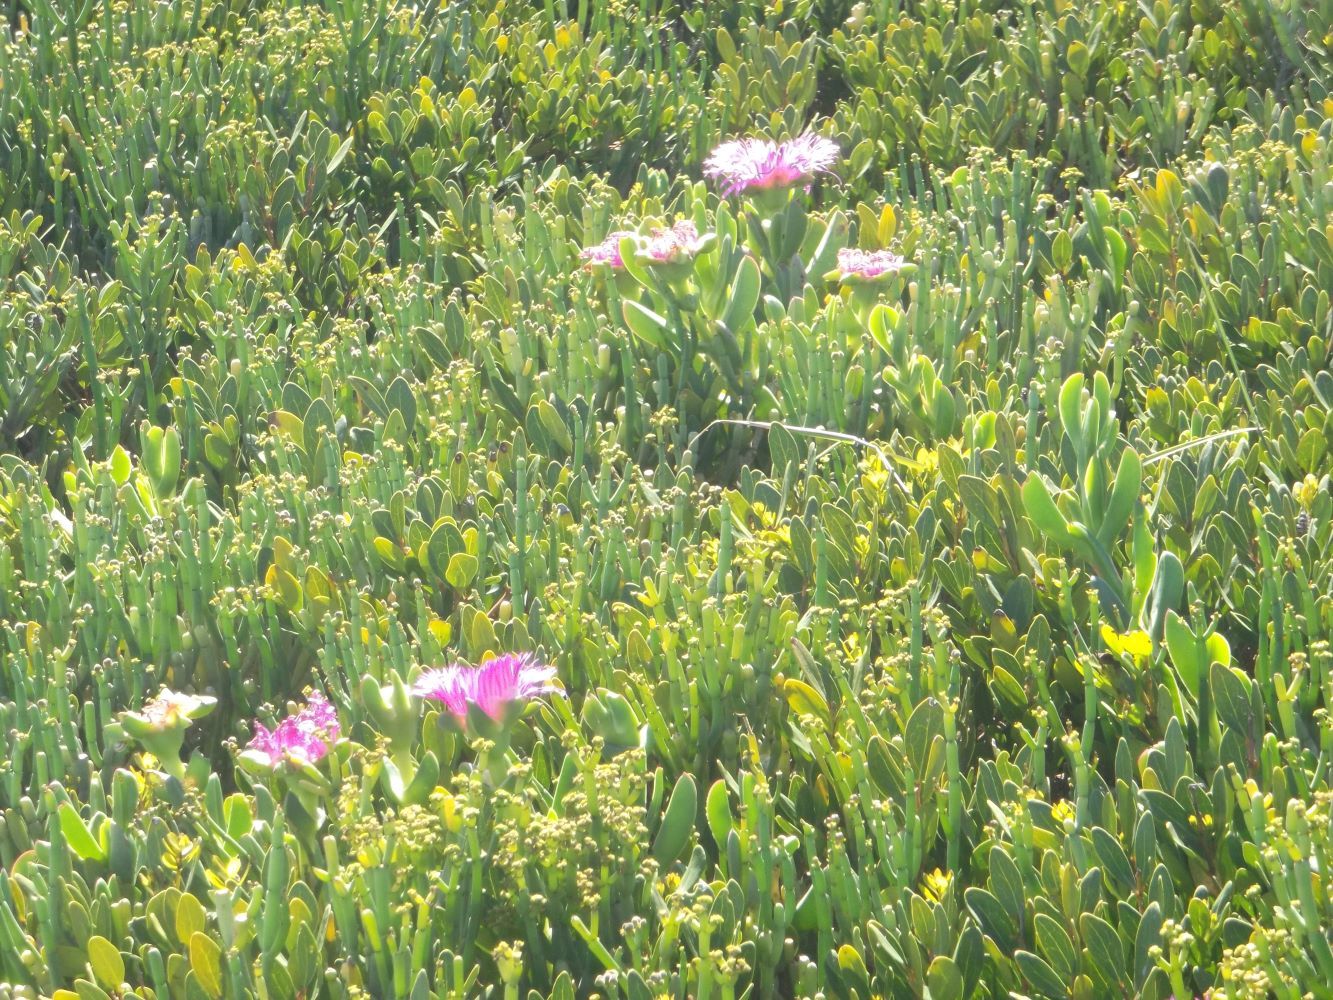 Carpobrotus deliciosus? growing on a dune near Haakgat in Cape Town in harmony with other plants.